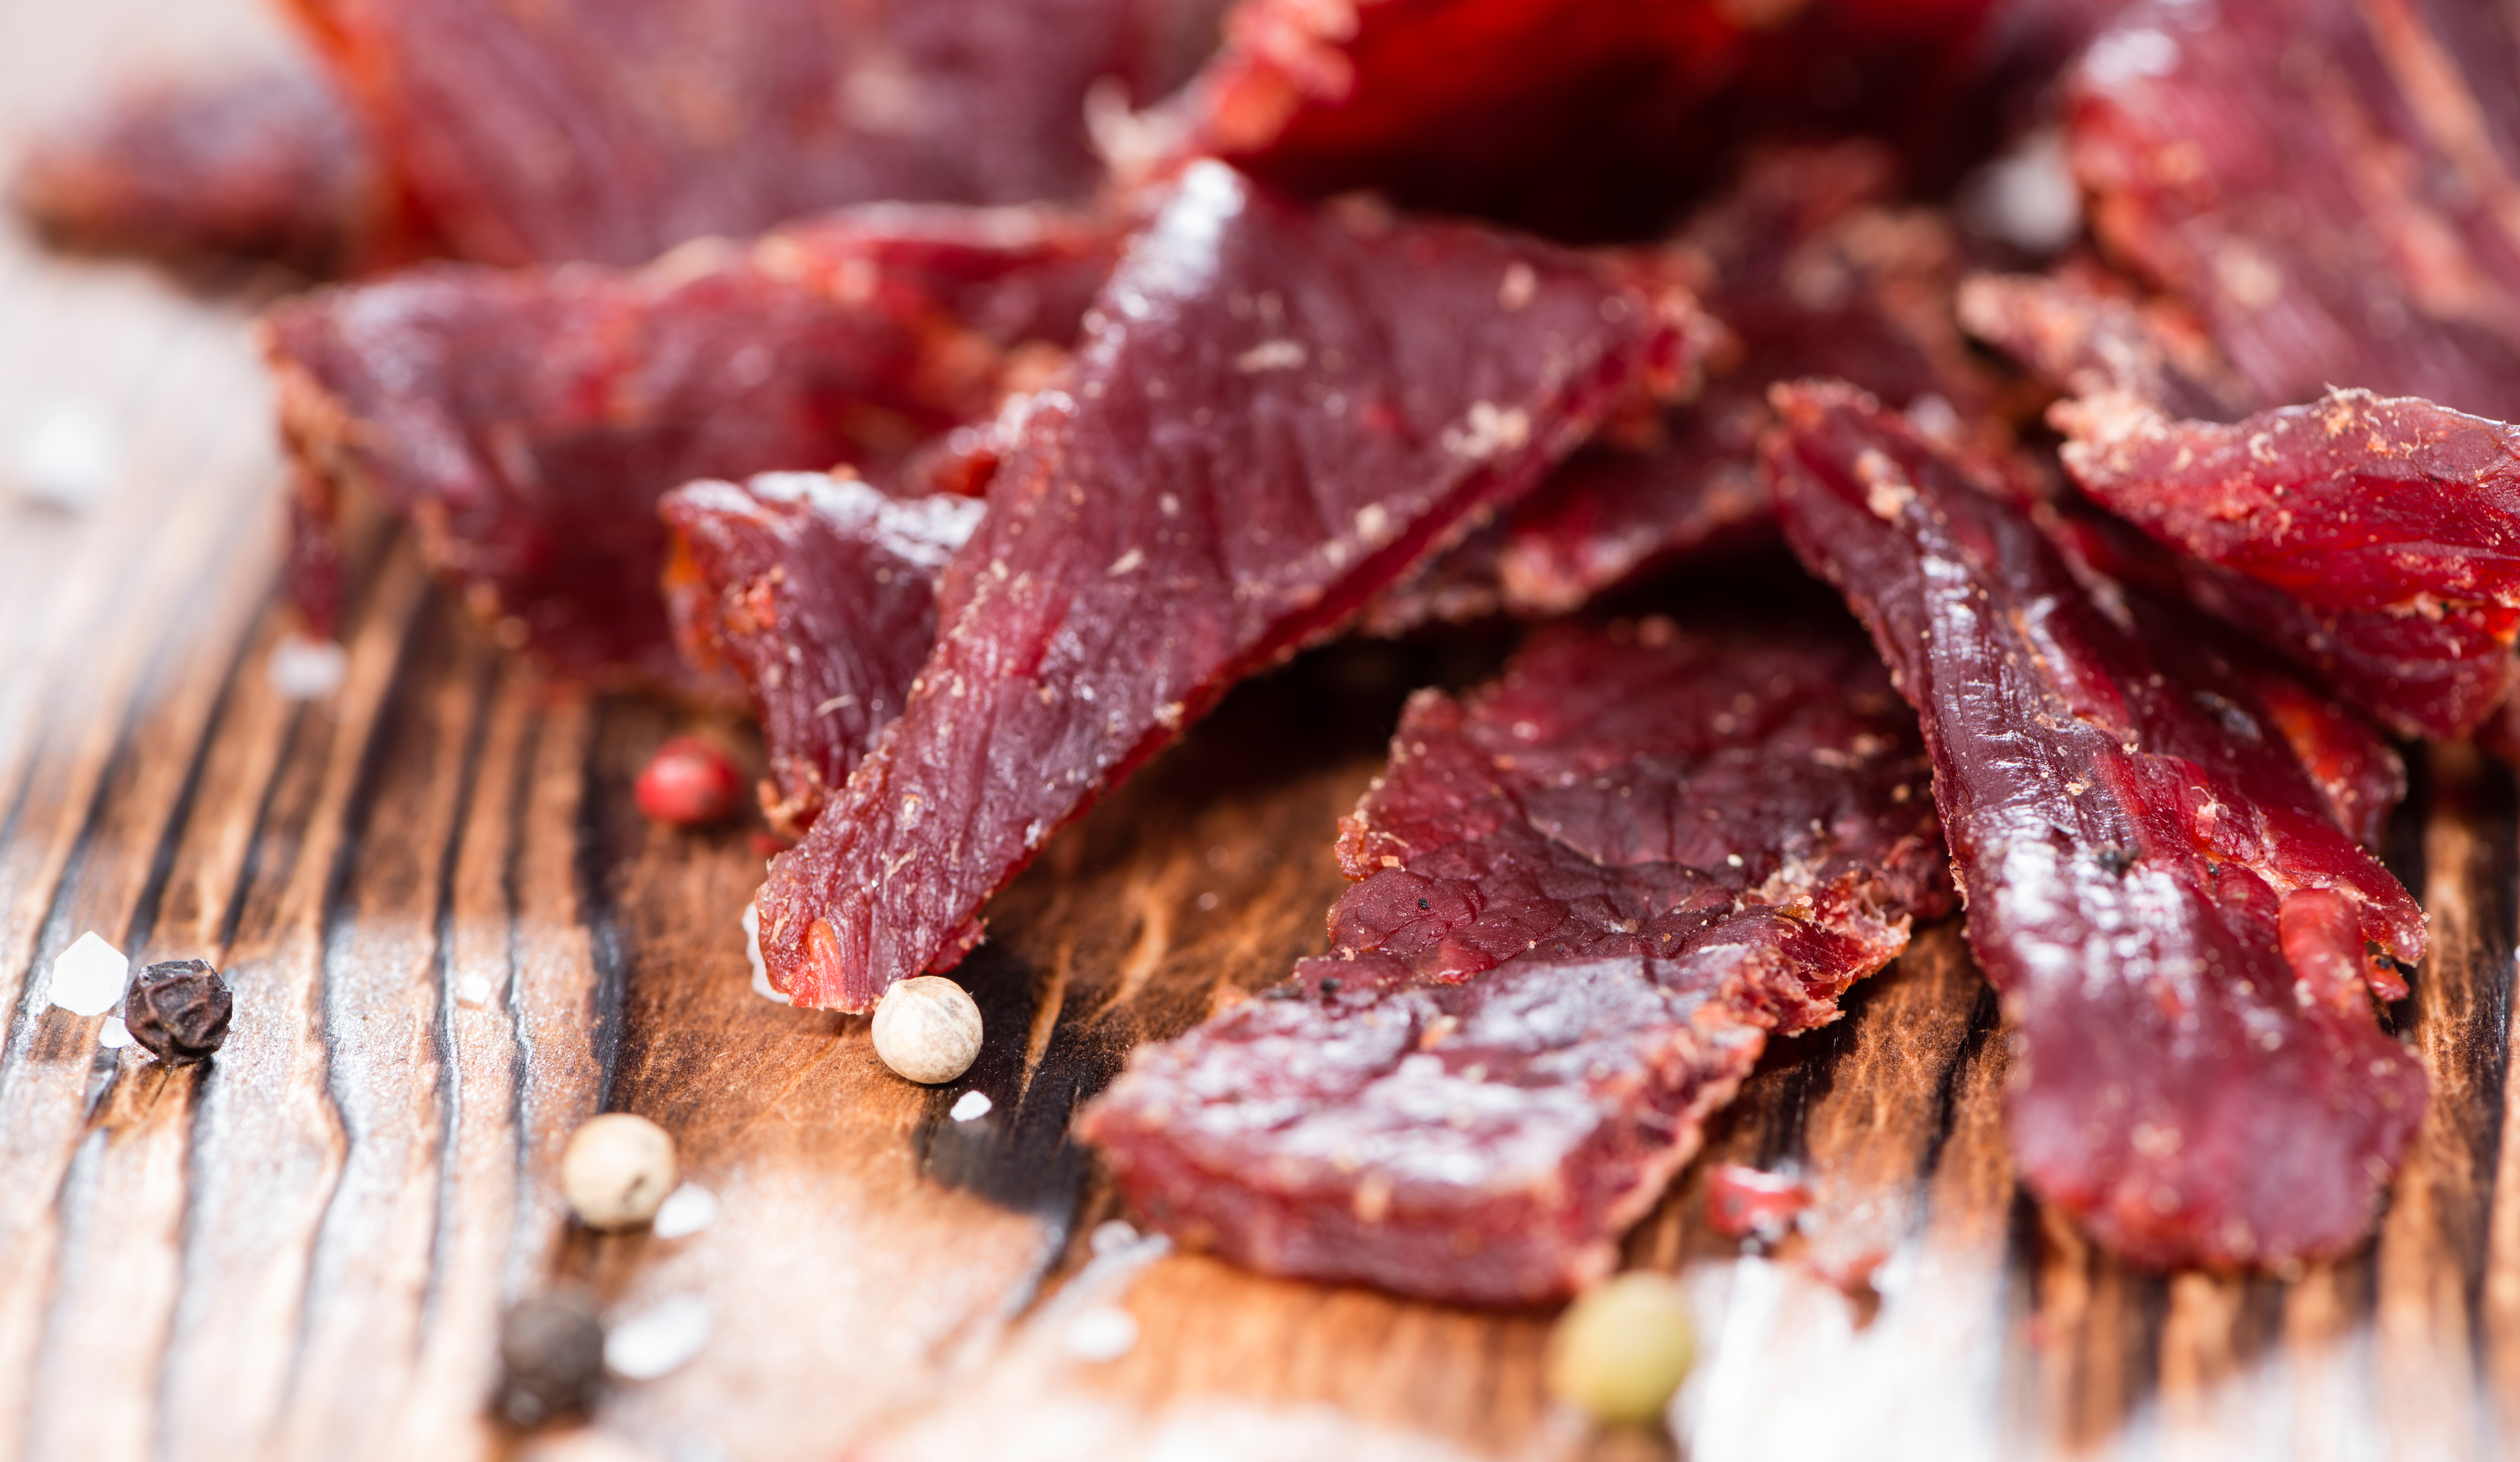 Deer jerky recipe for backpacking | Exotic jerky for the trail